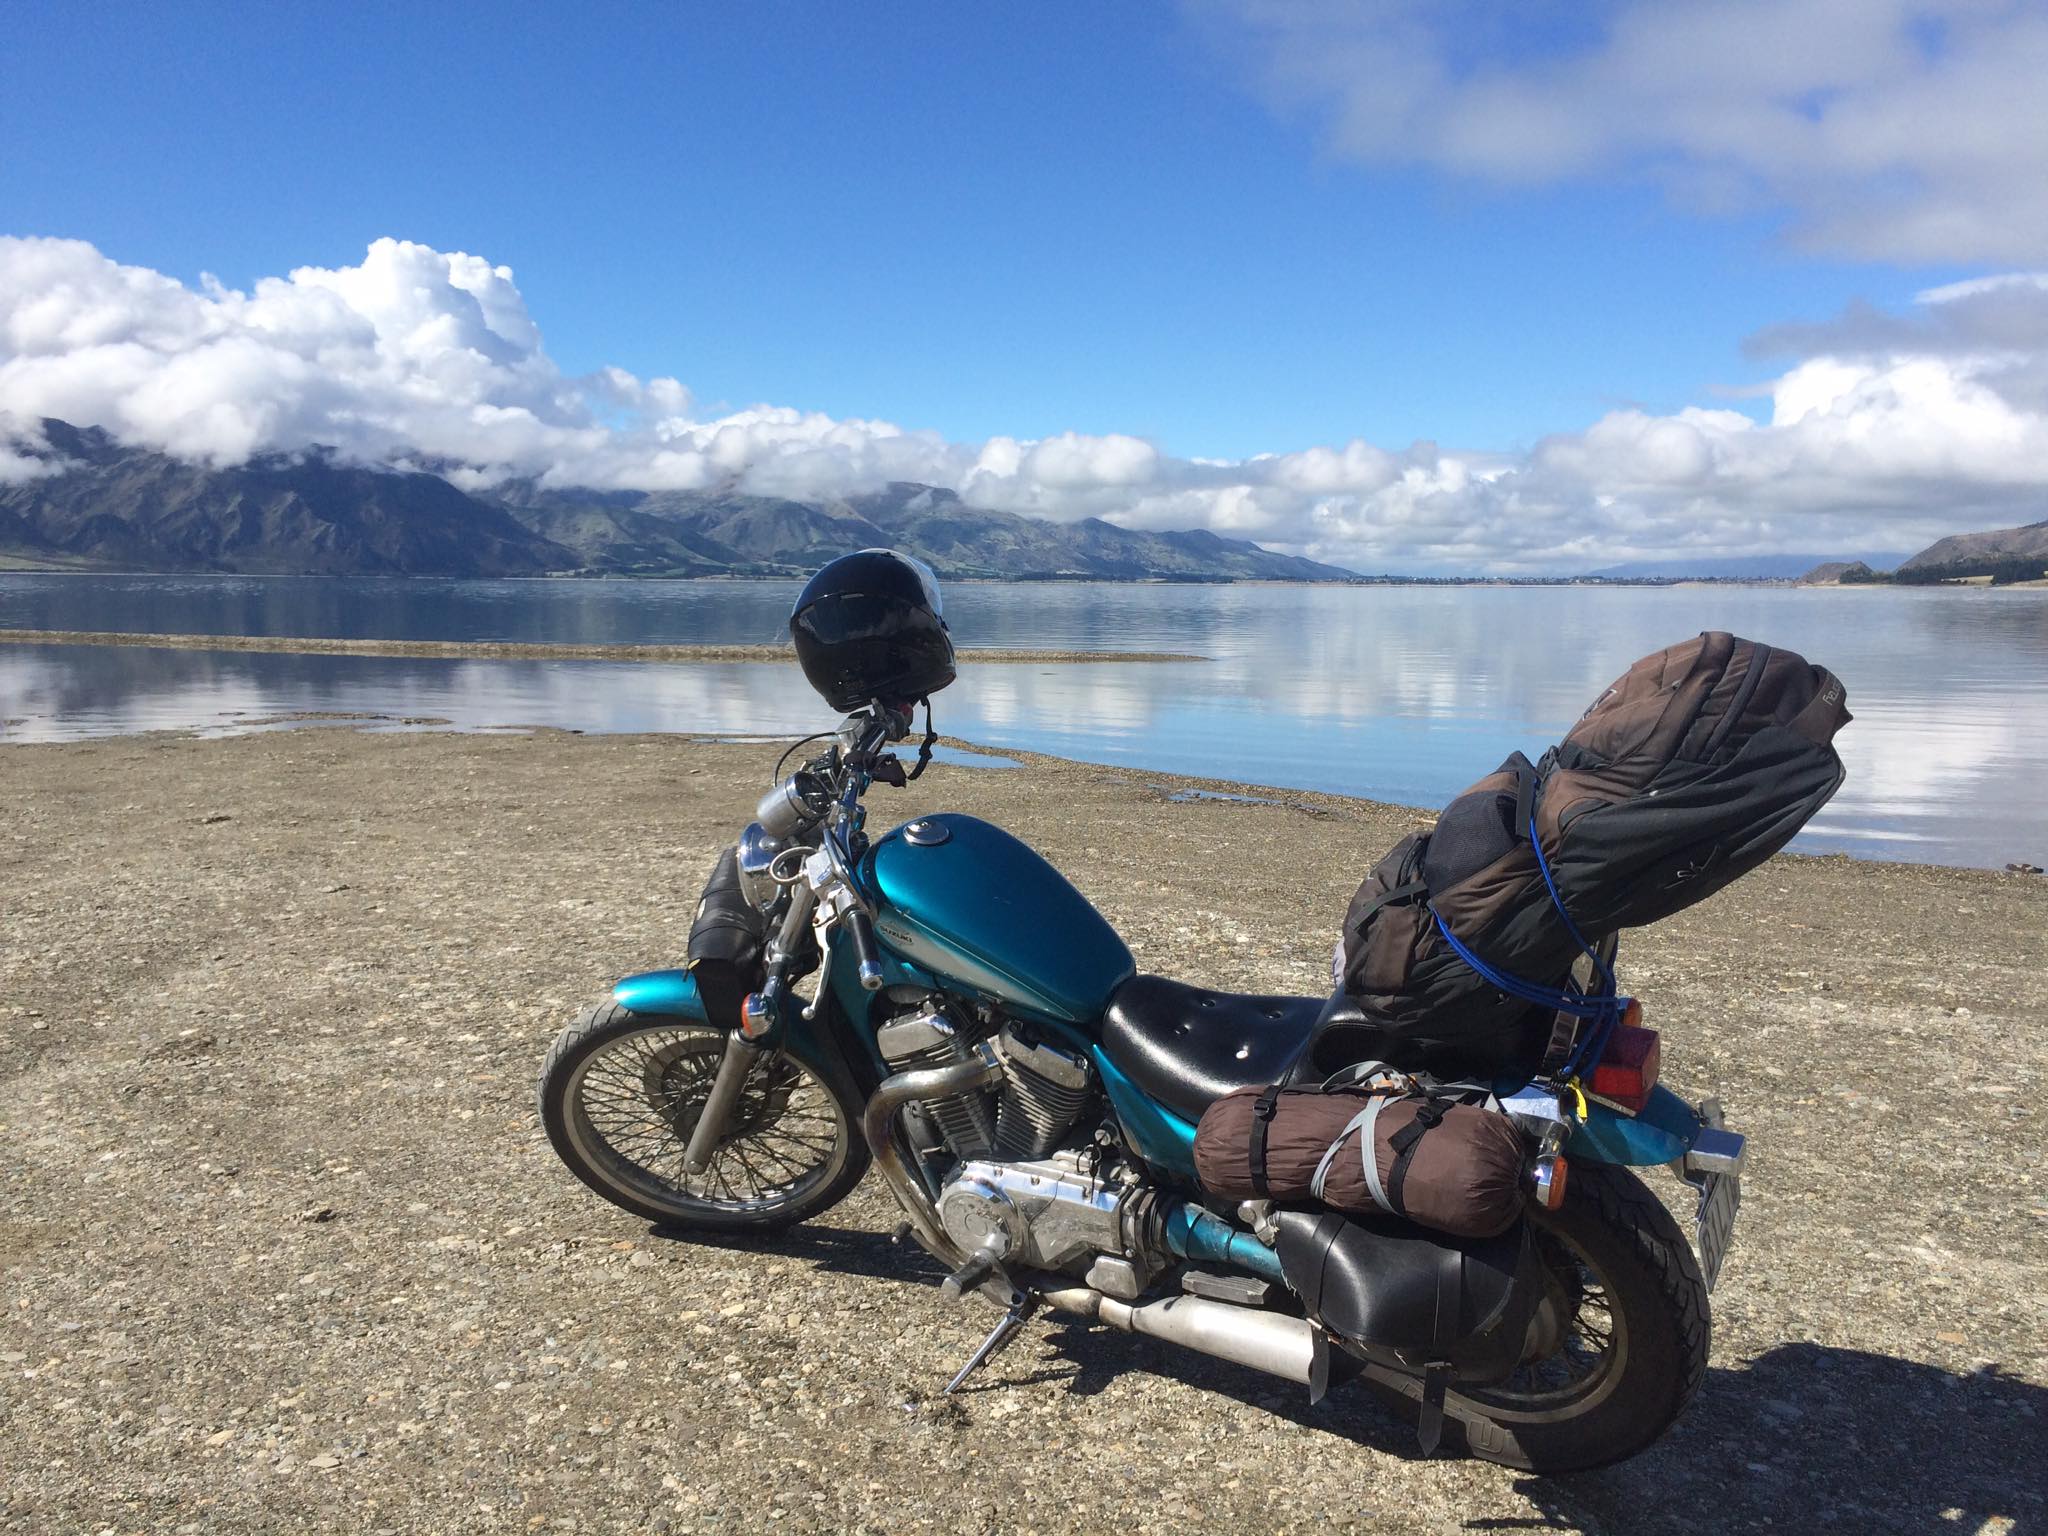 A captivating photo featuring a motorcycle parked near the tranquil shores of a lake in the South Island of New Zealand. The motorcycle, with its sleek design, contrasts against the serene waters of the lake, reflecting the surrounding mountains and the clear blue sky. The image captures the sense of adventure and freedom, illustrating a moment of peaceful contemplation amidst the breathtaking natural beauty of the South Island.